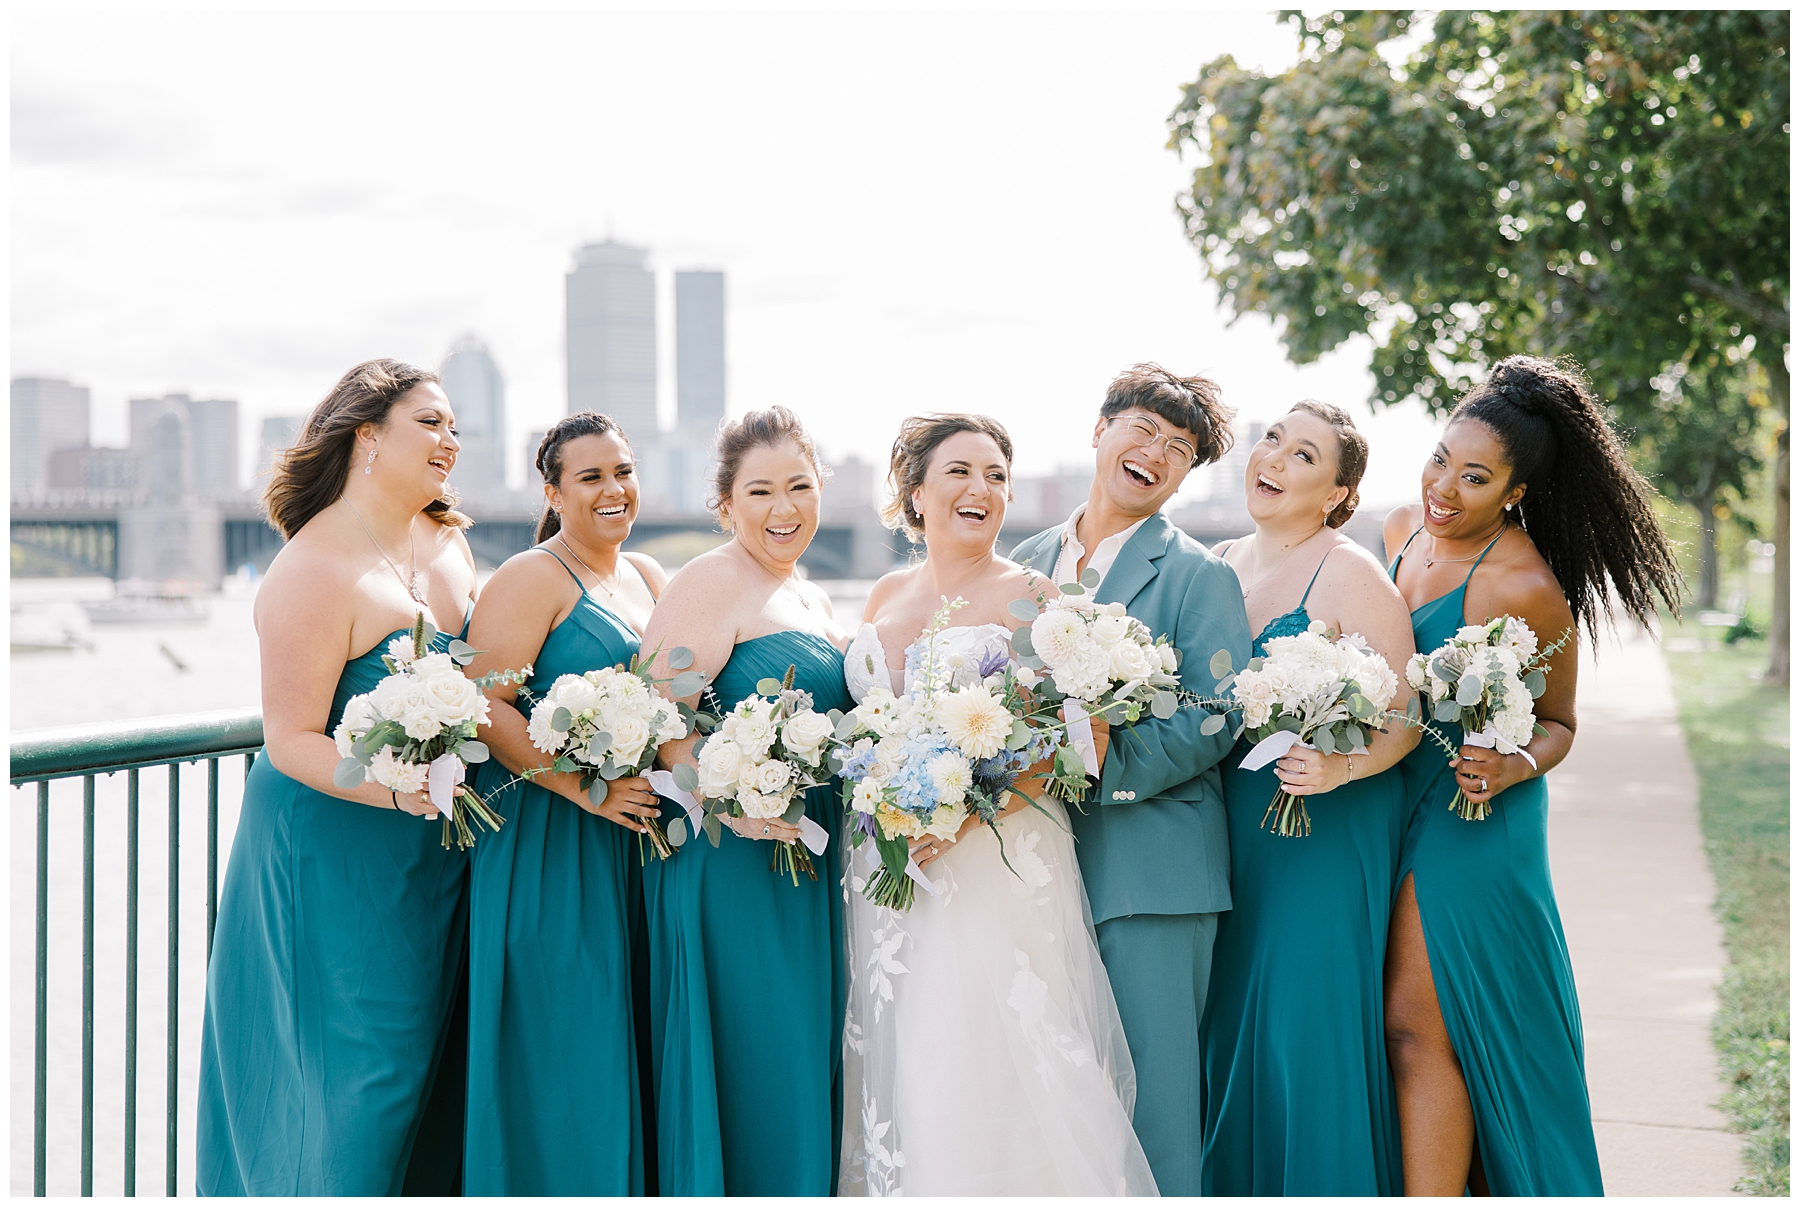 bride and bridesmaids in Peacock dresses